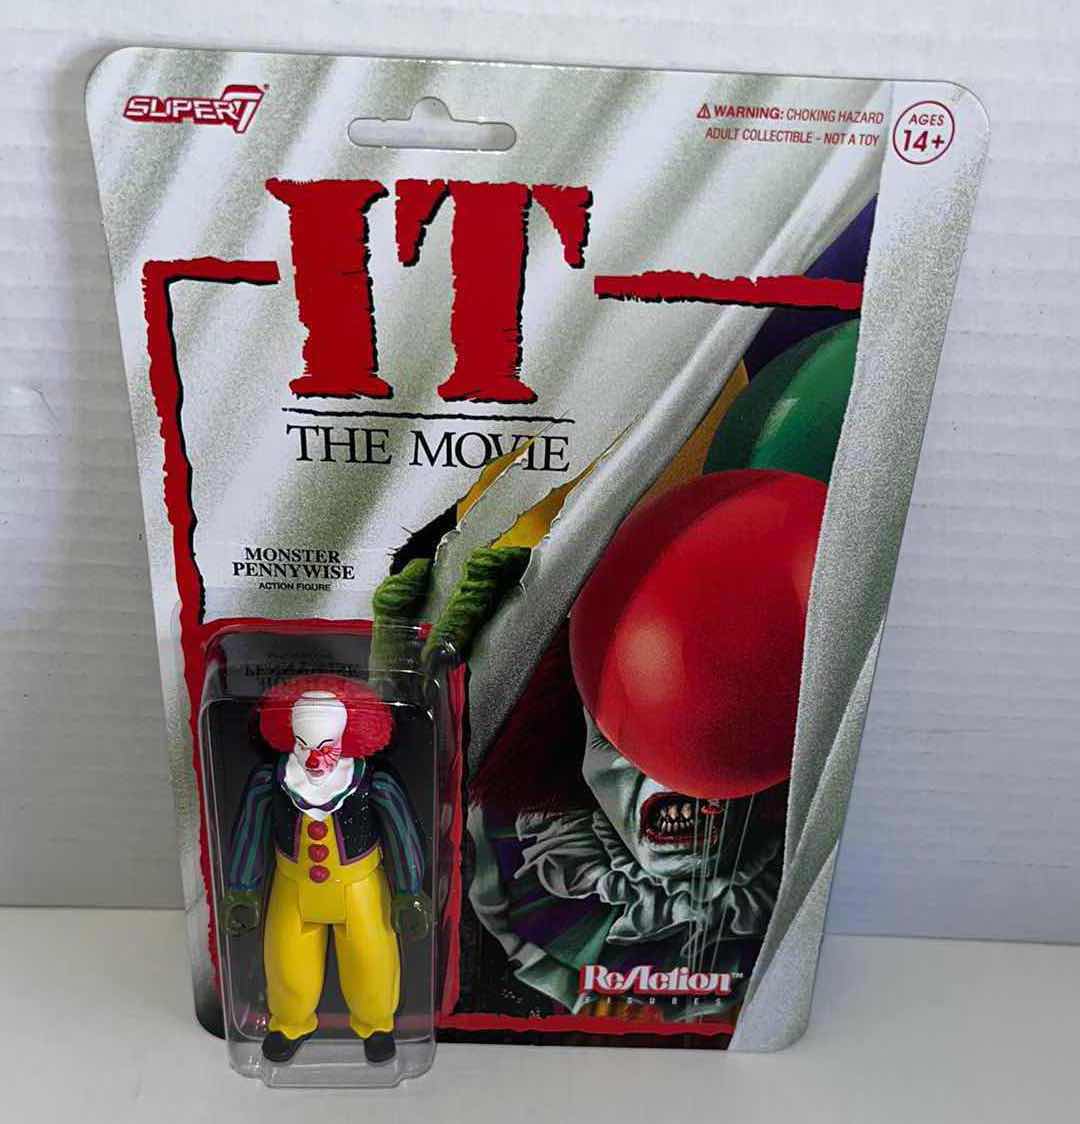 Photo 1 of NEW SUPER7 REACTION FIGURES, IT MOVIE “MONSTER PENNYWISE” (1)